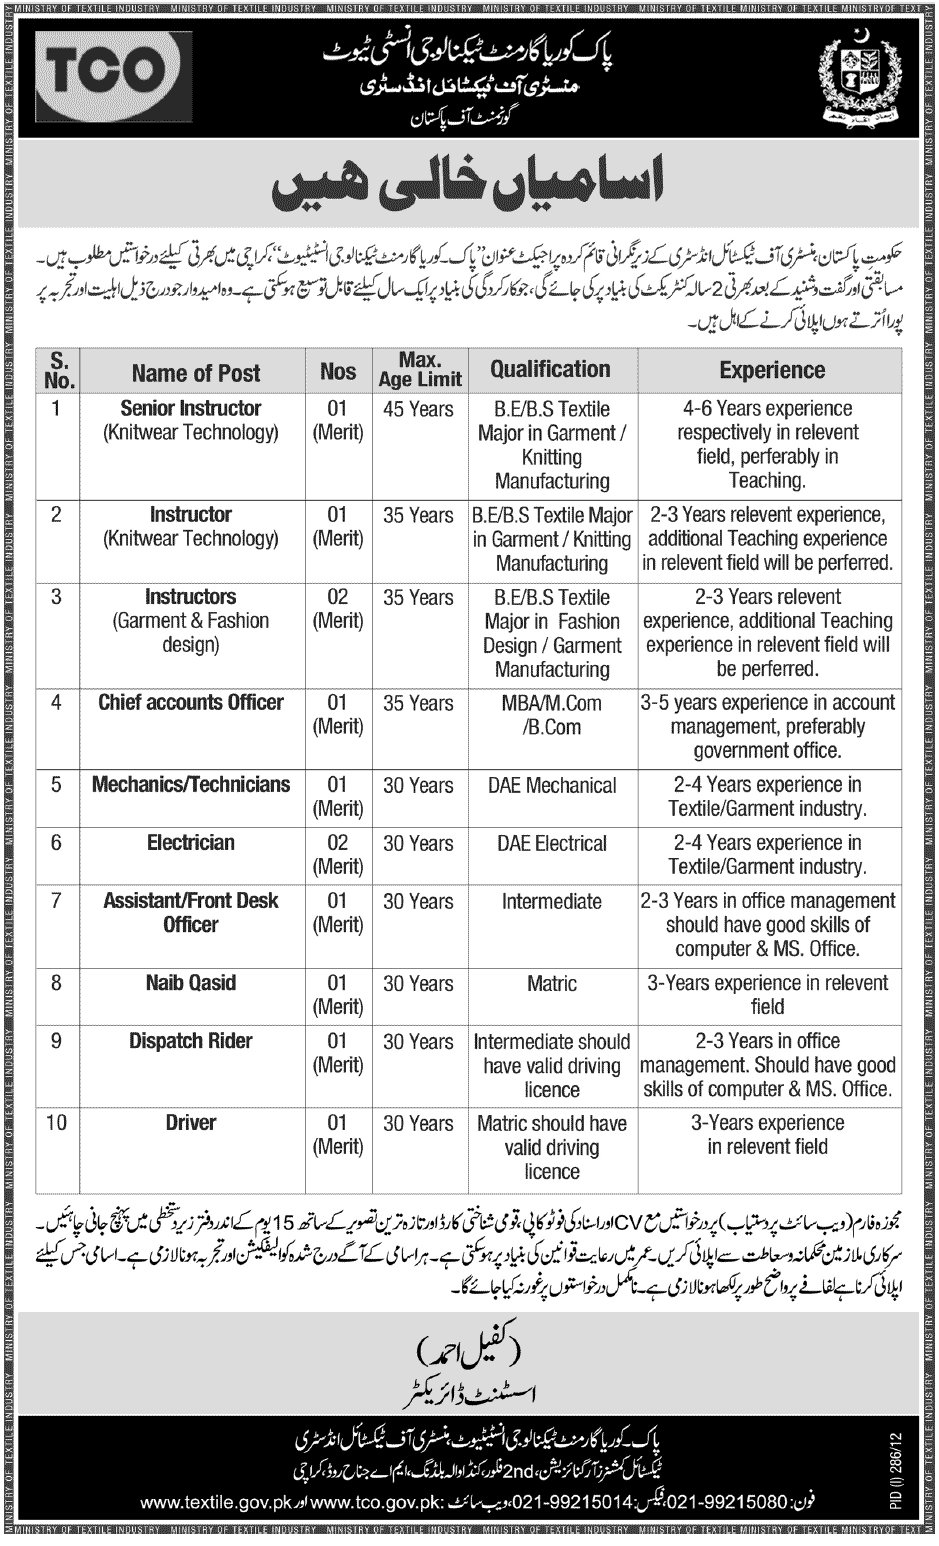 Pak Korea Garment Technnology Institute (Ministry of Textile Industry) Requires Admin and Teaching Staff (Government Job)